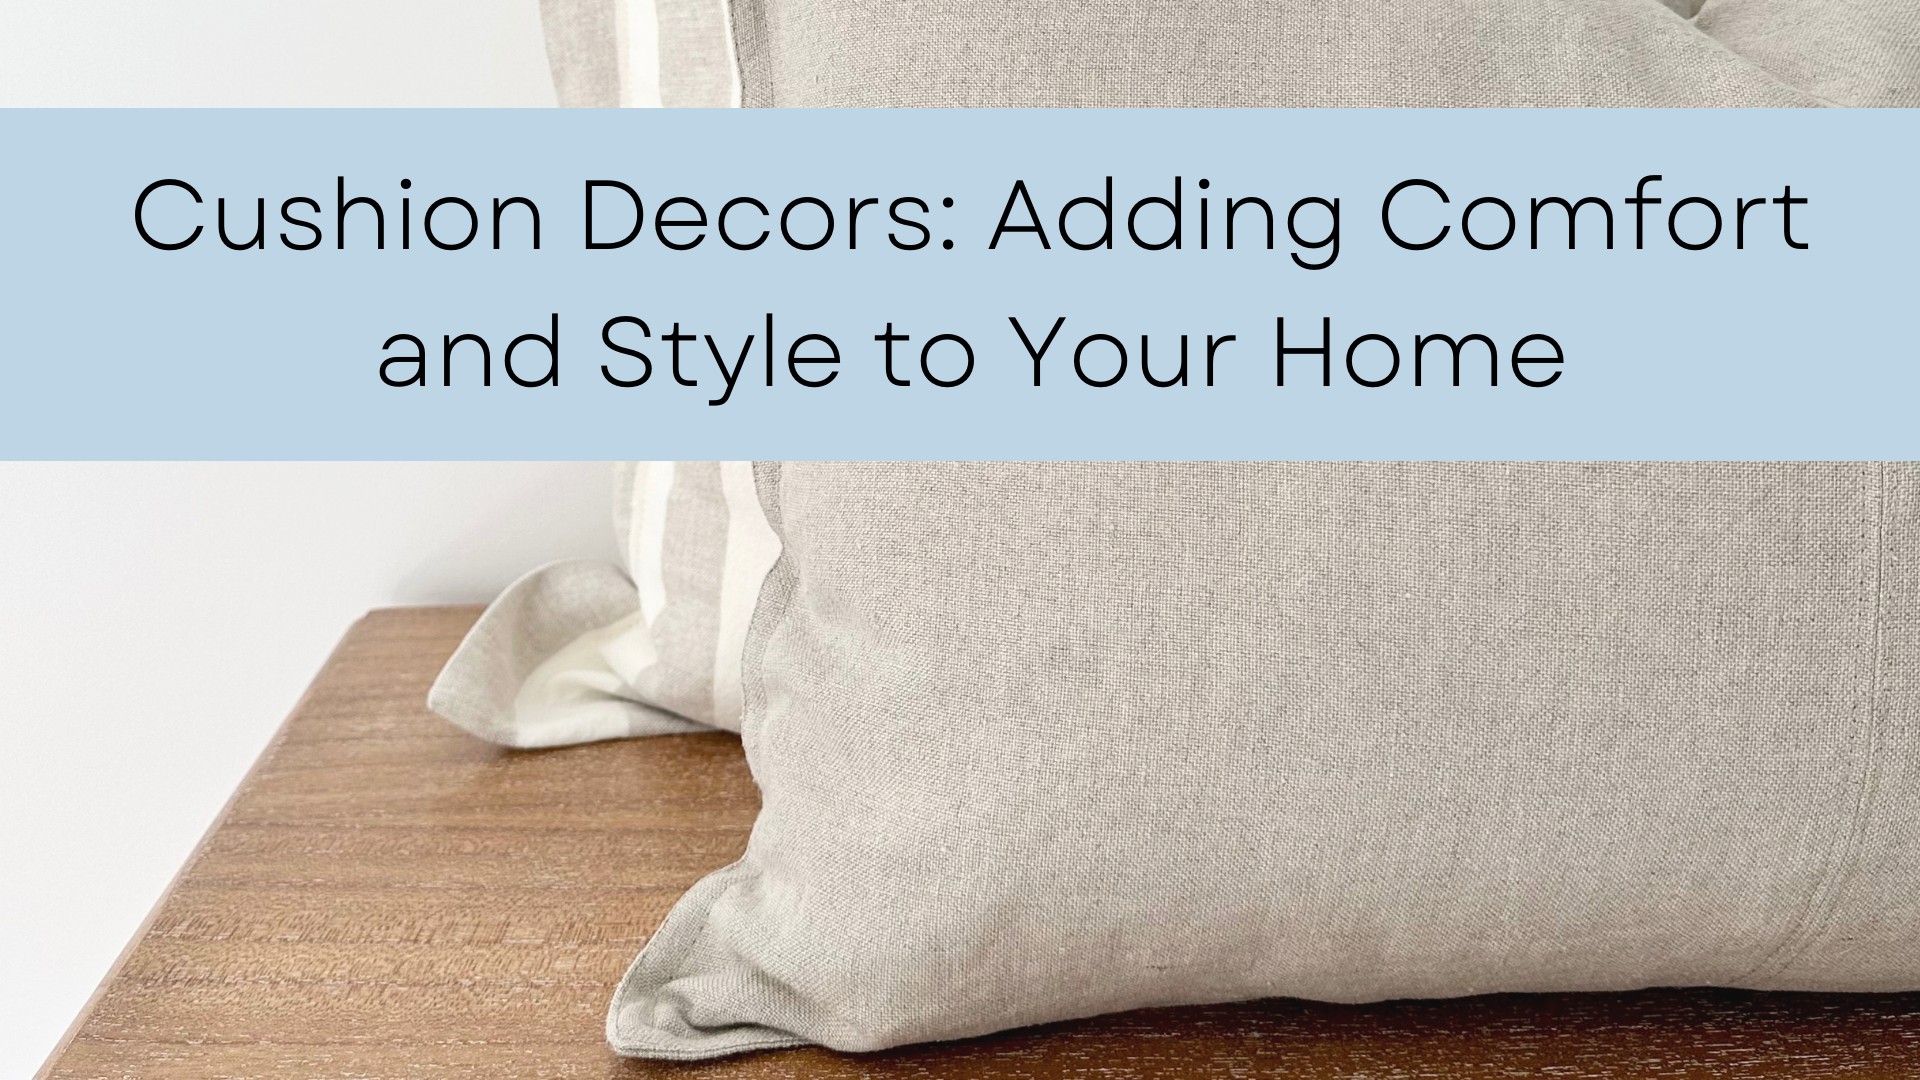 Cushion Decors: Adding Comfort and Style to Your Home